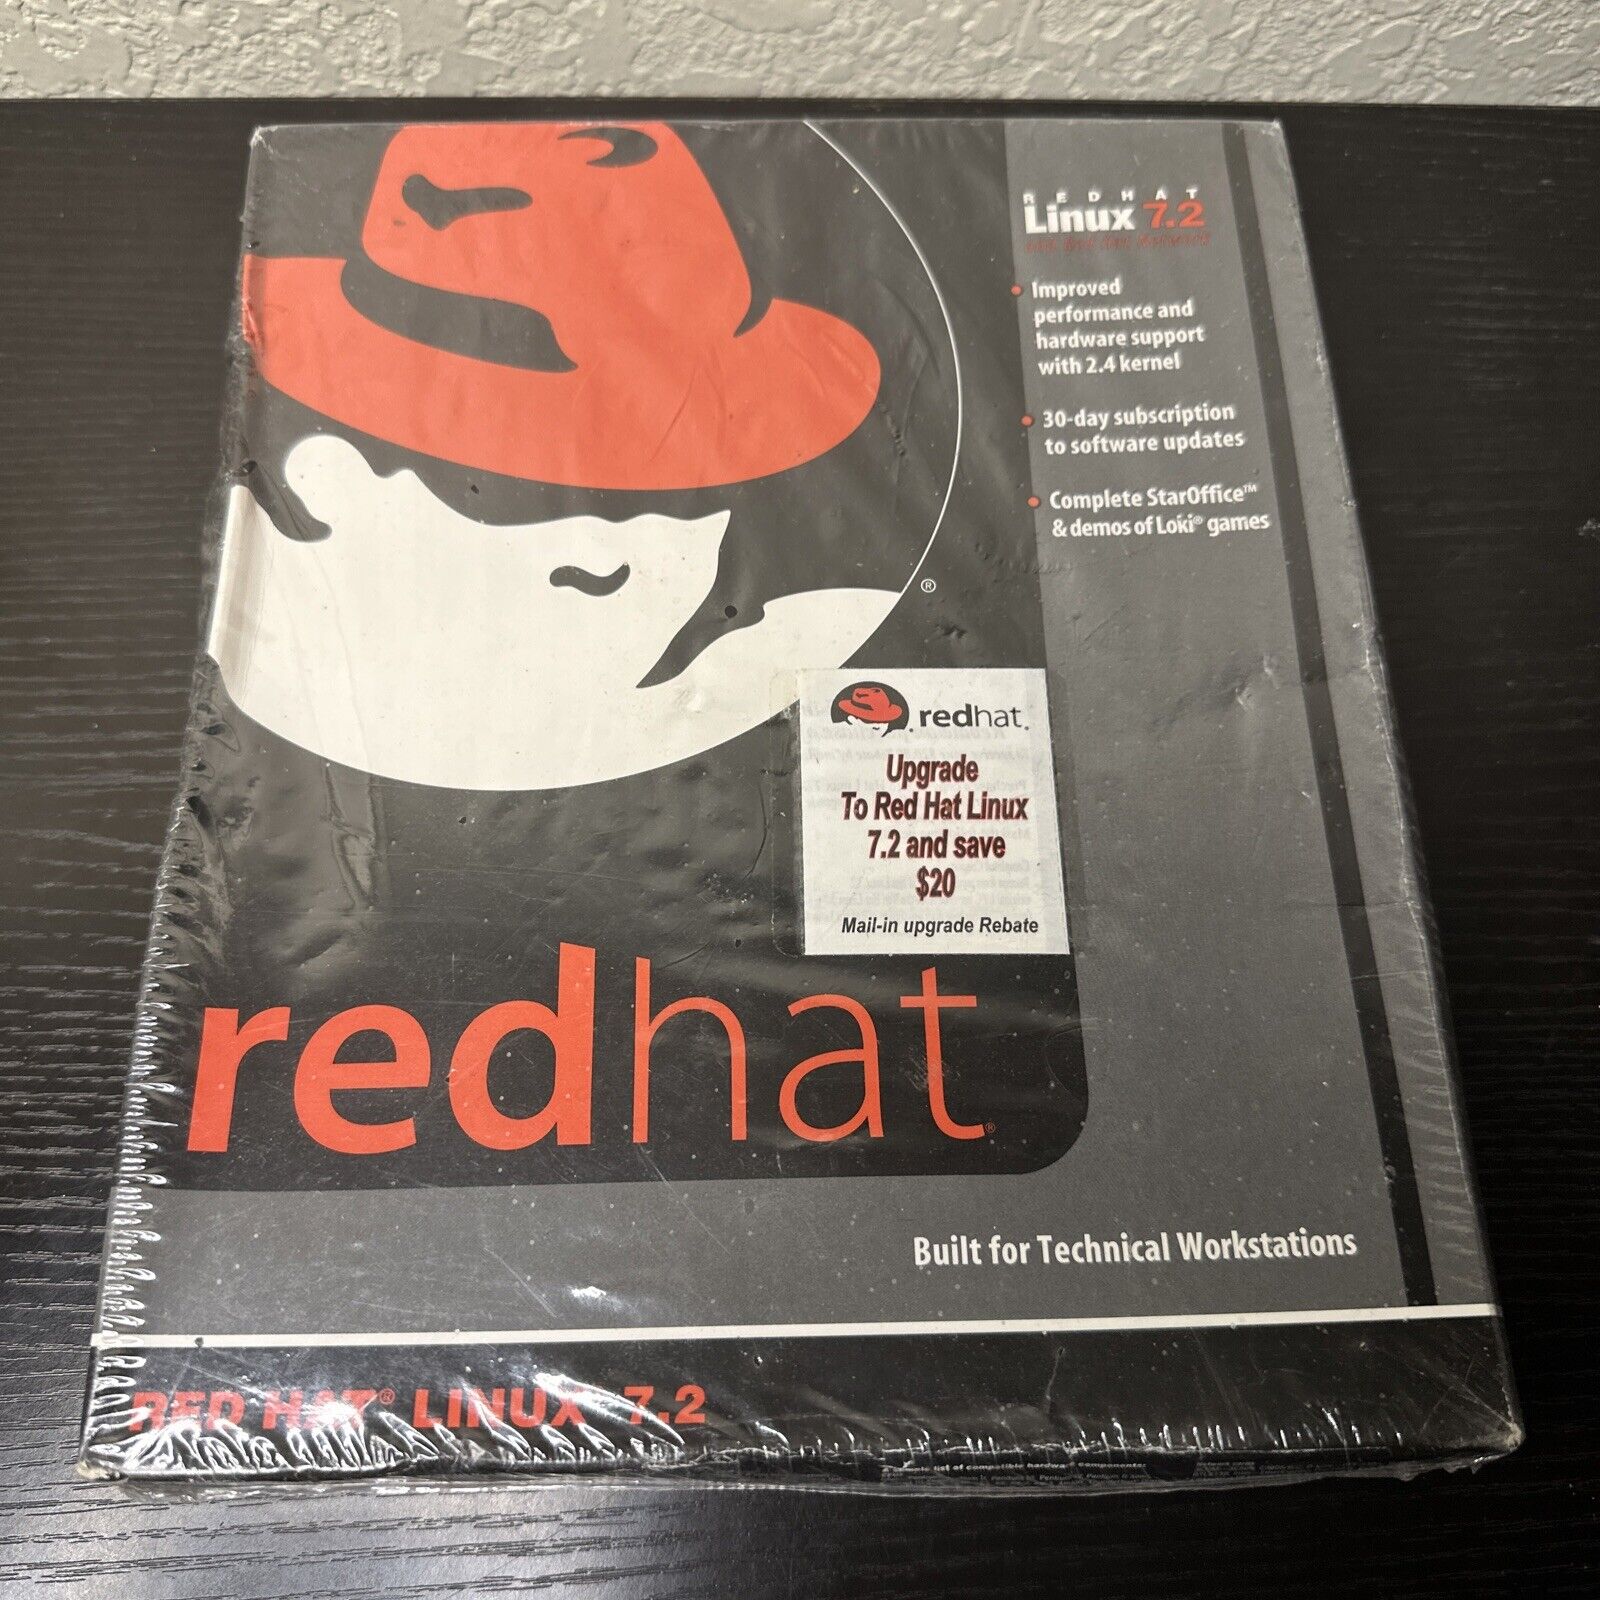 Linux 7.2 Red hat Software Built For Technical Workstations New Sealed